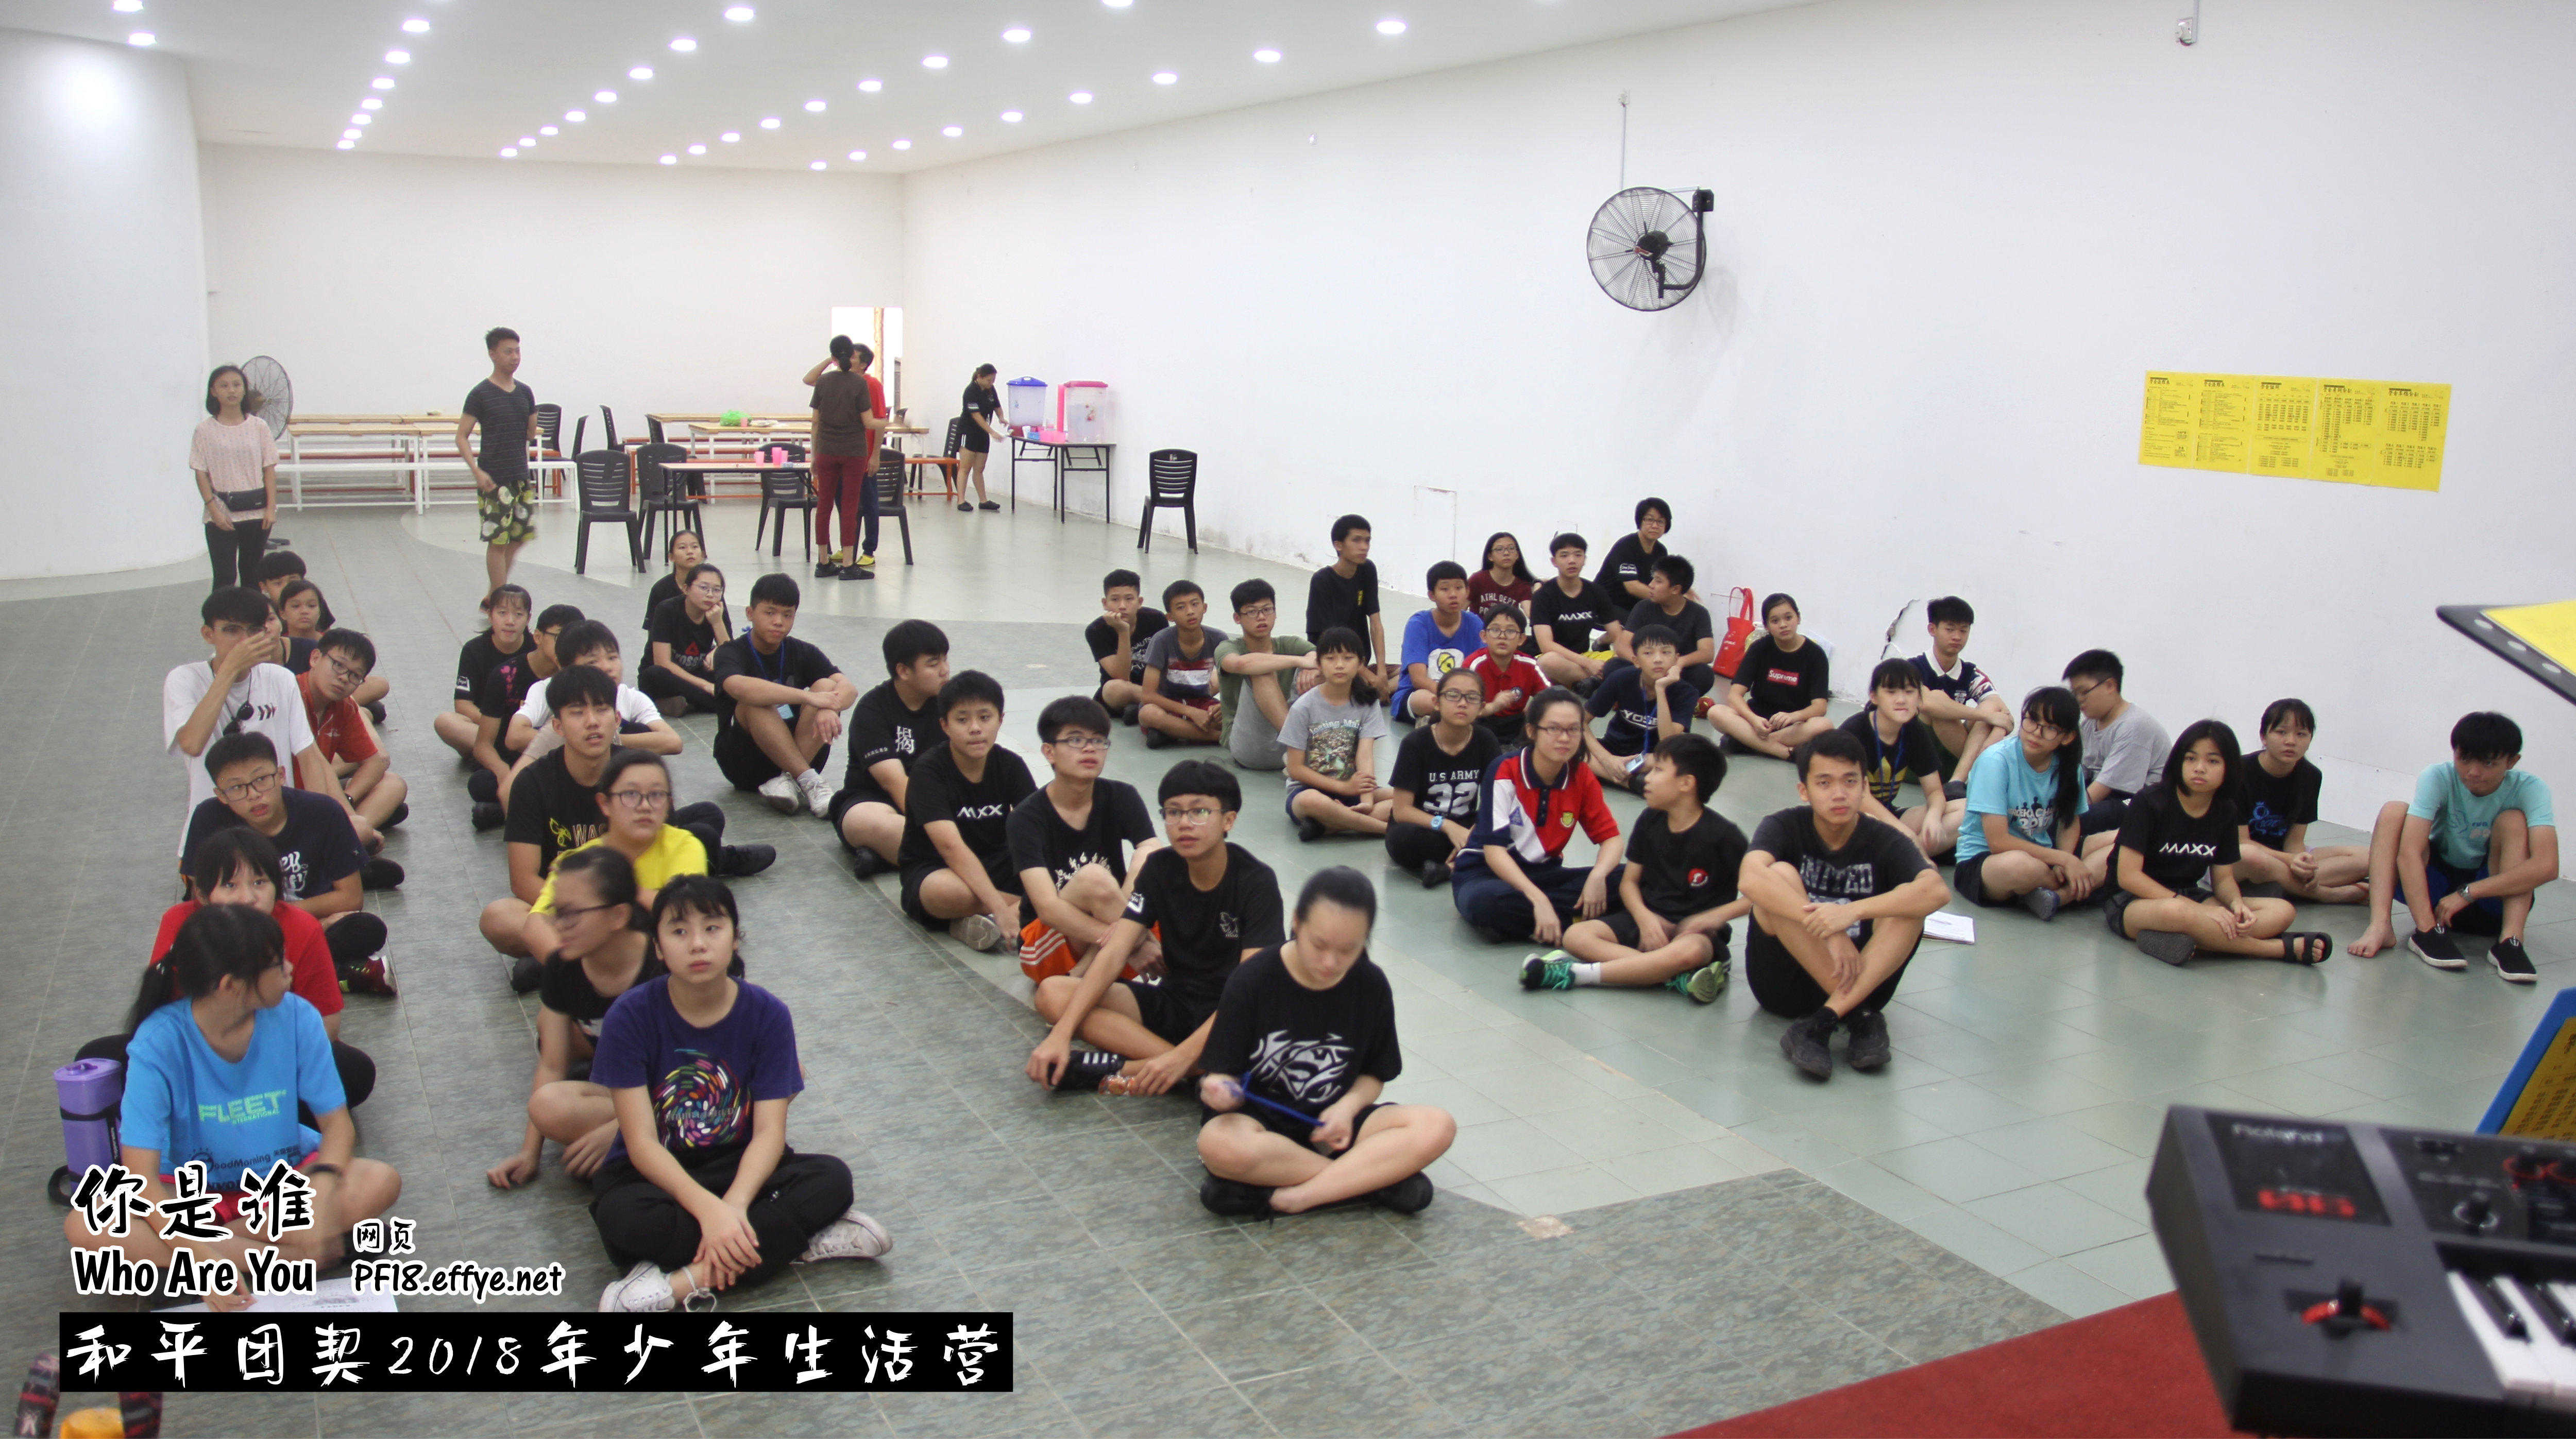 Peace Fellowship Youth Camp 2018 Who Are You 和平团契 2018 年少年生活营 你是谁 A001-038